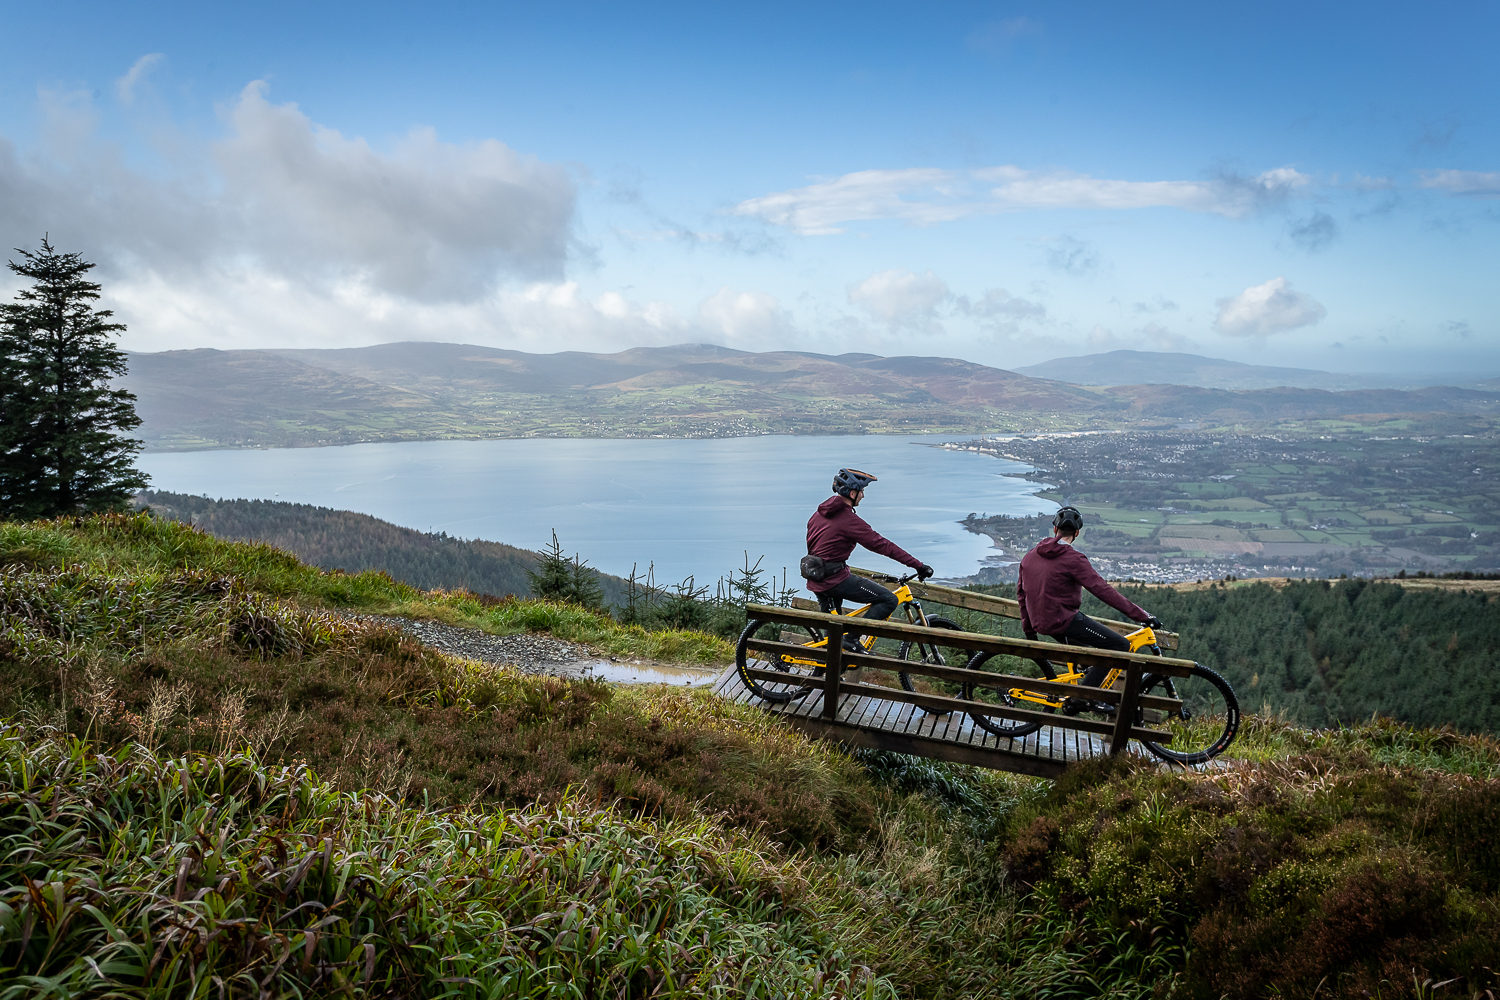 Mountain bikers above Rostrevor, County Down